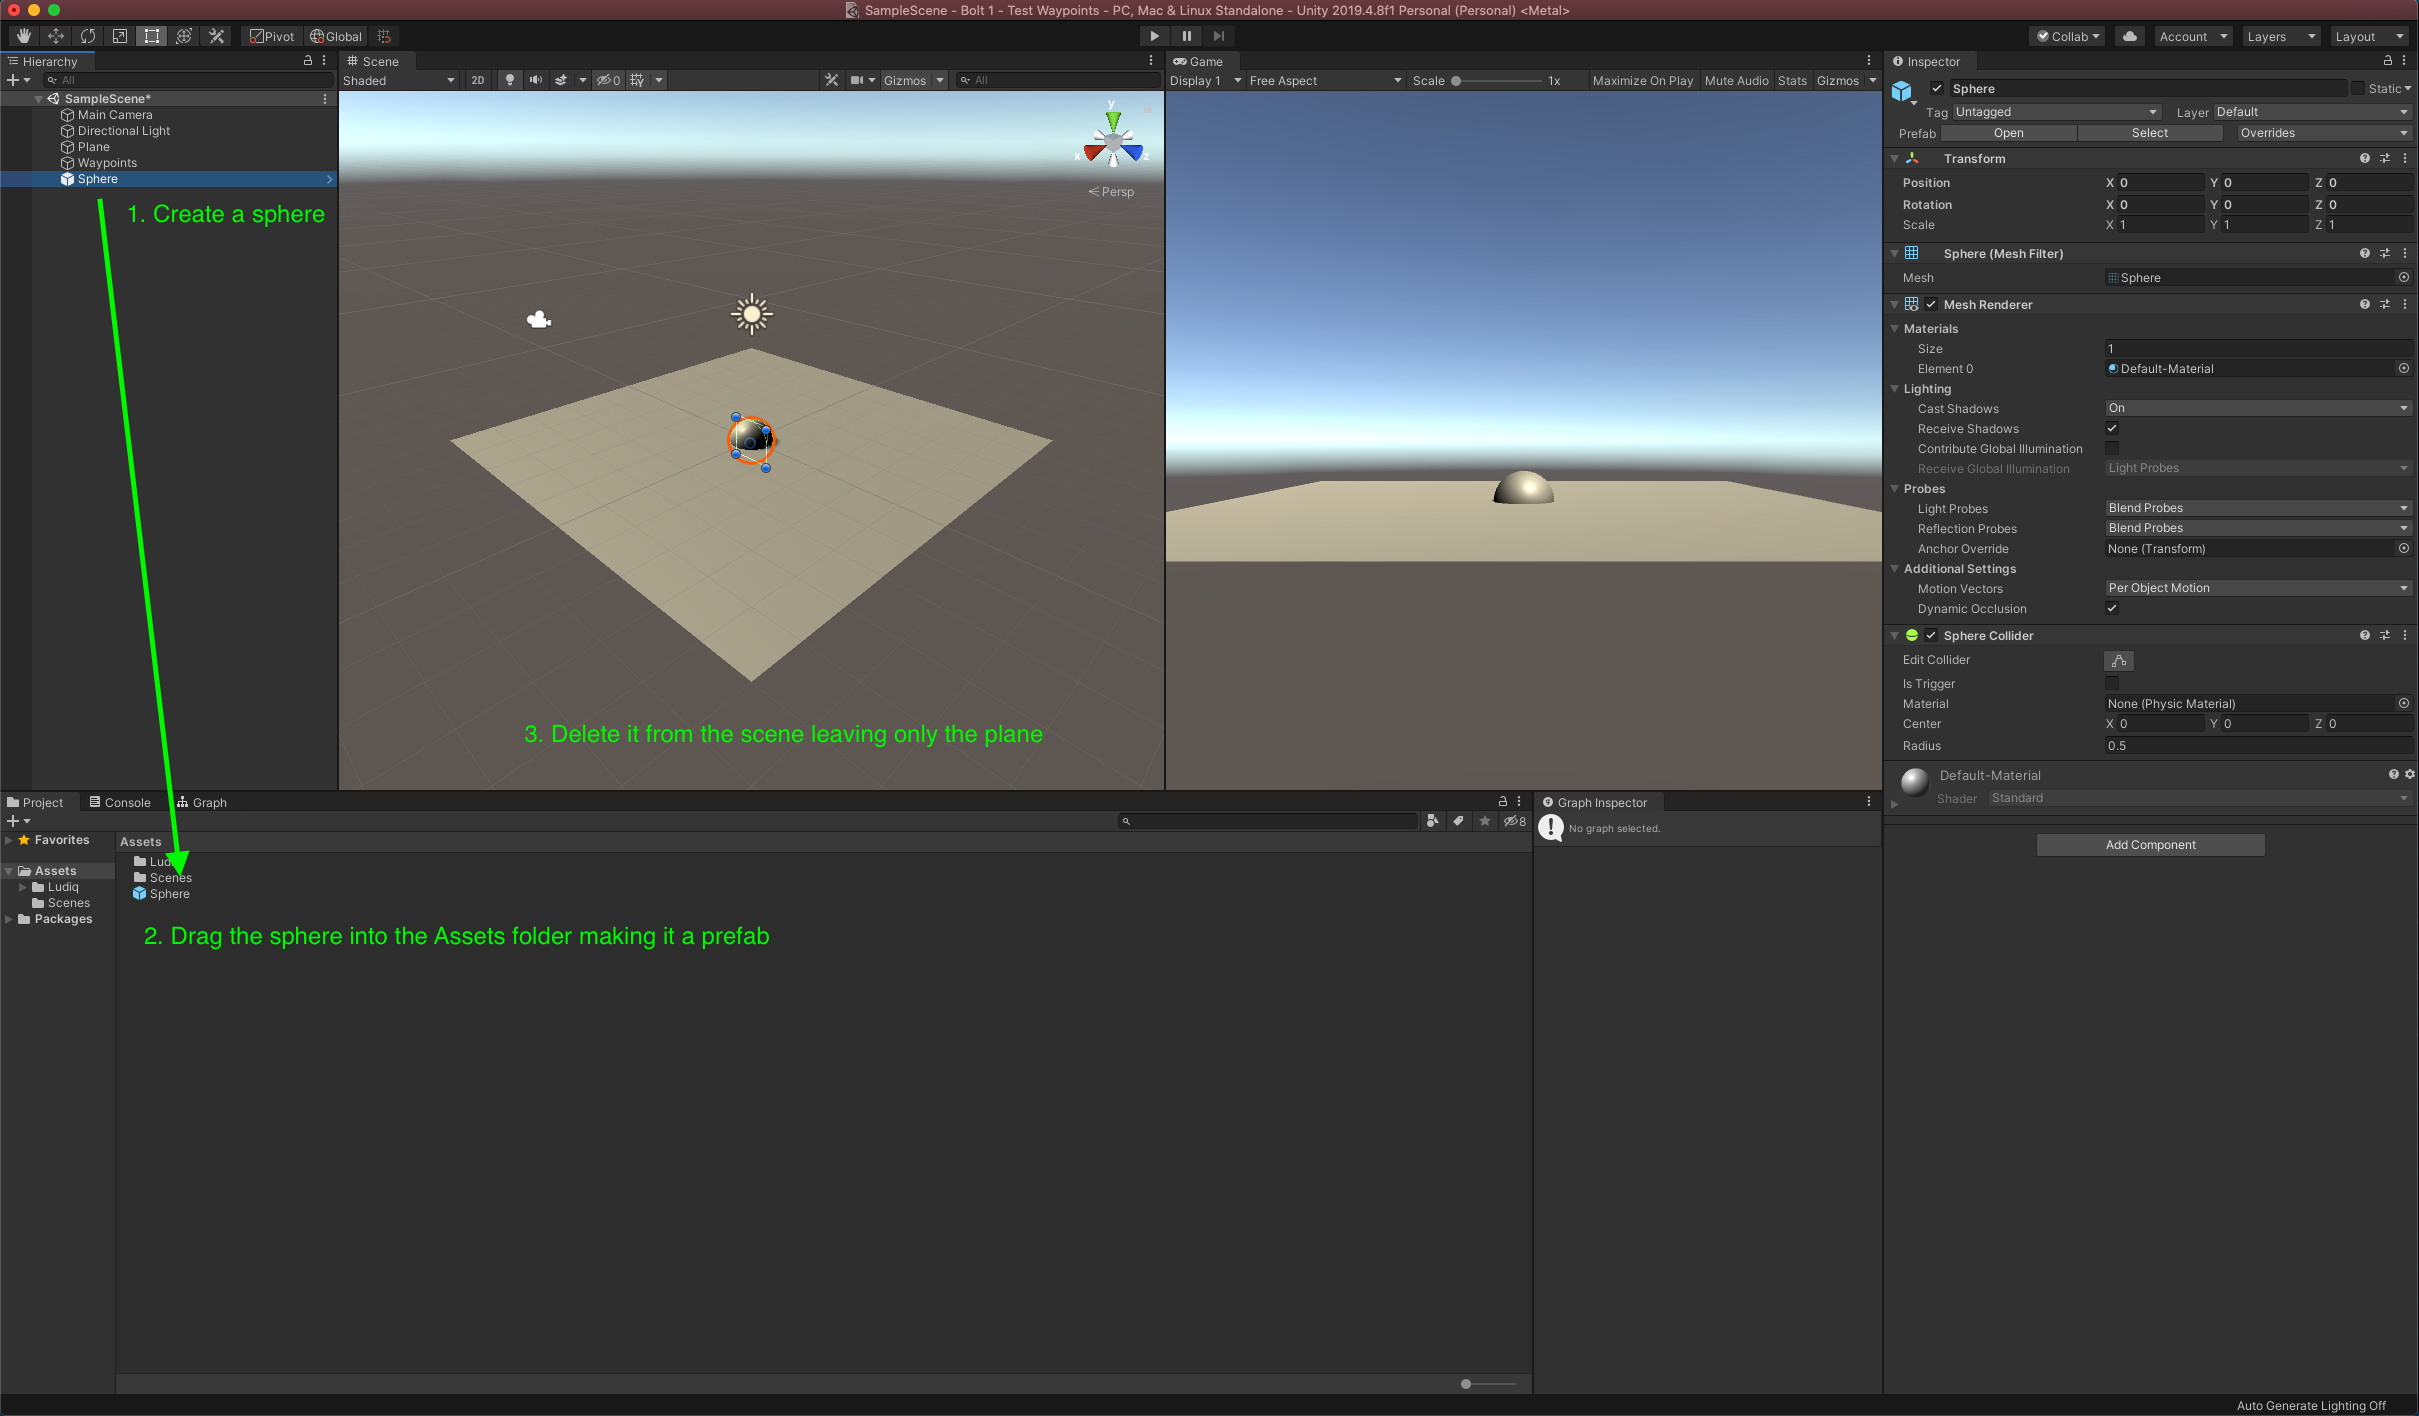 Bolt - Instantiate Game Objects